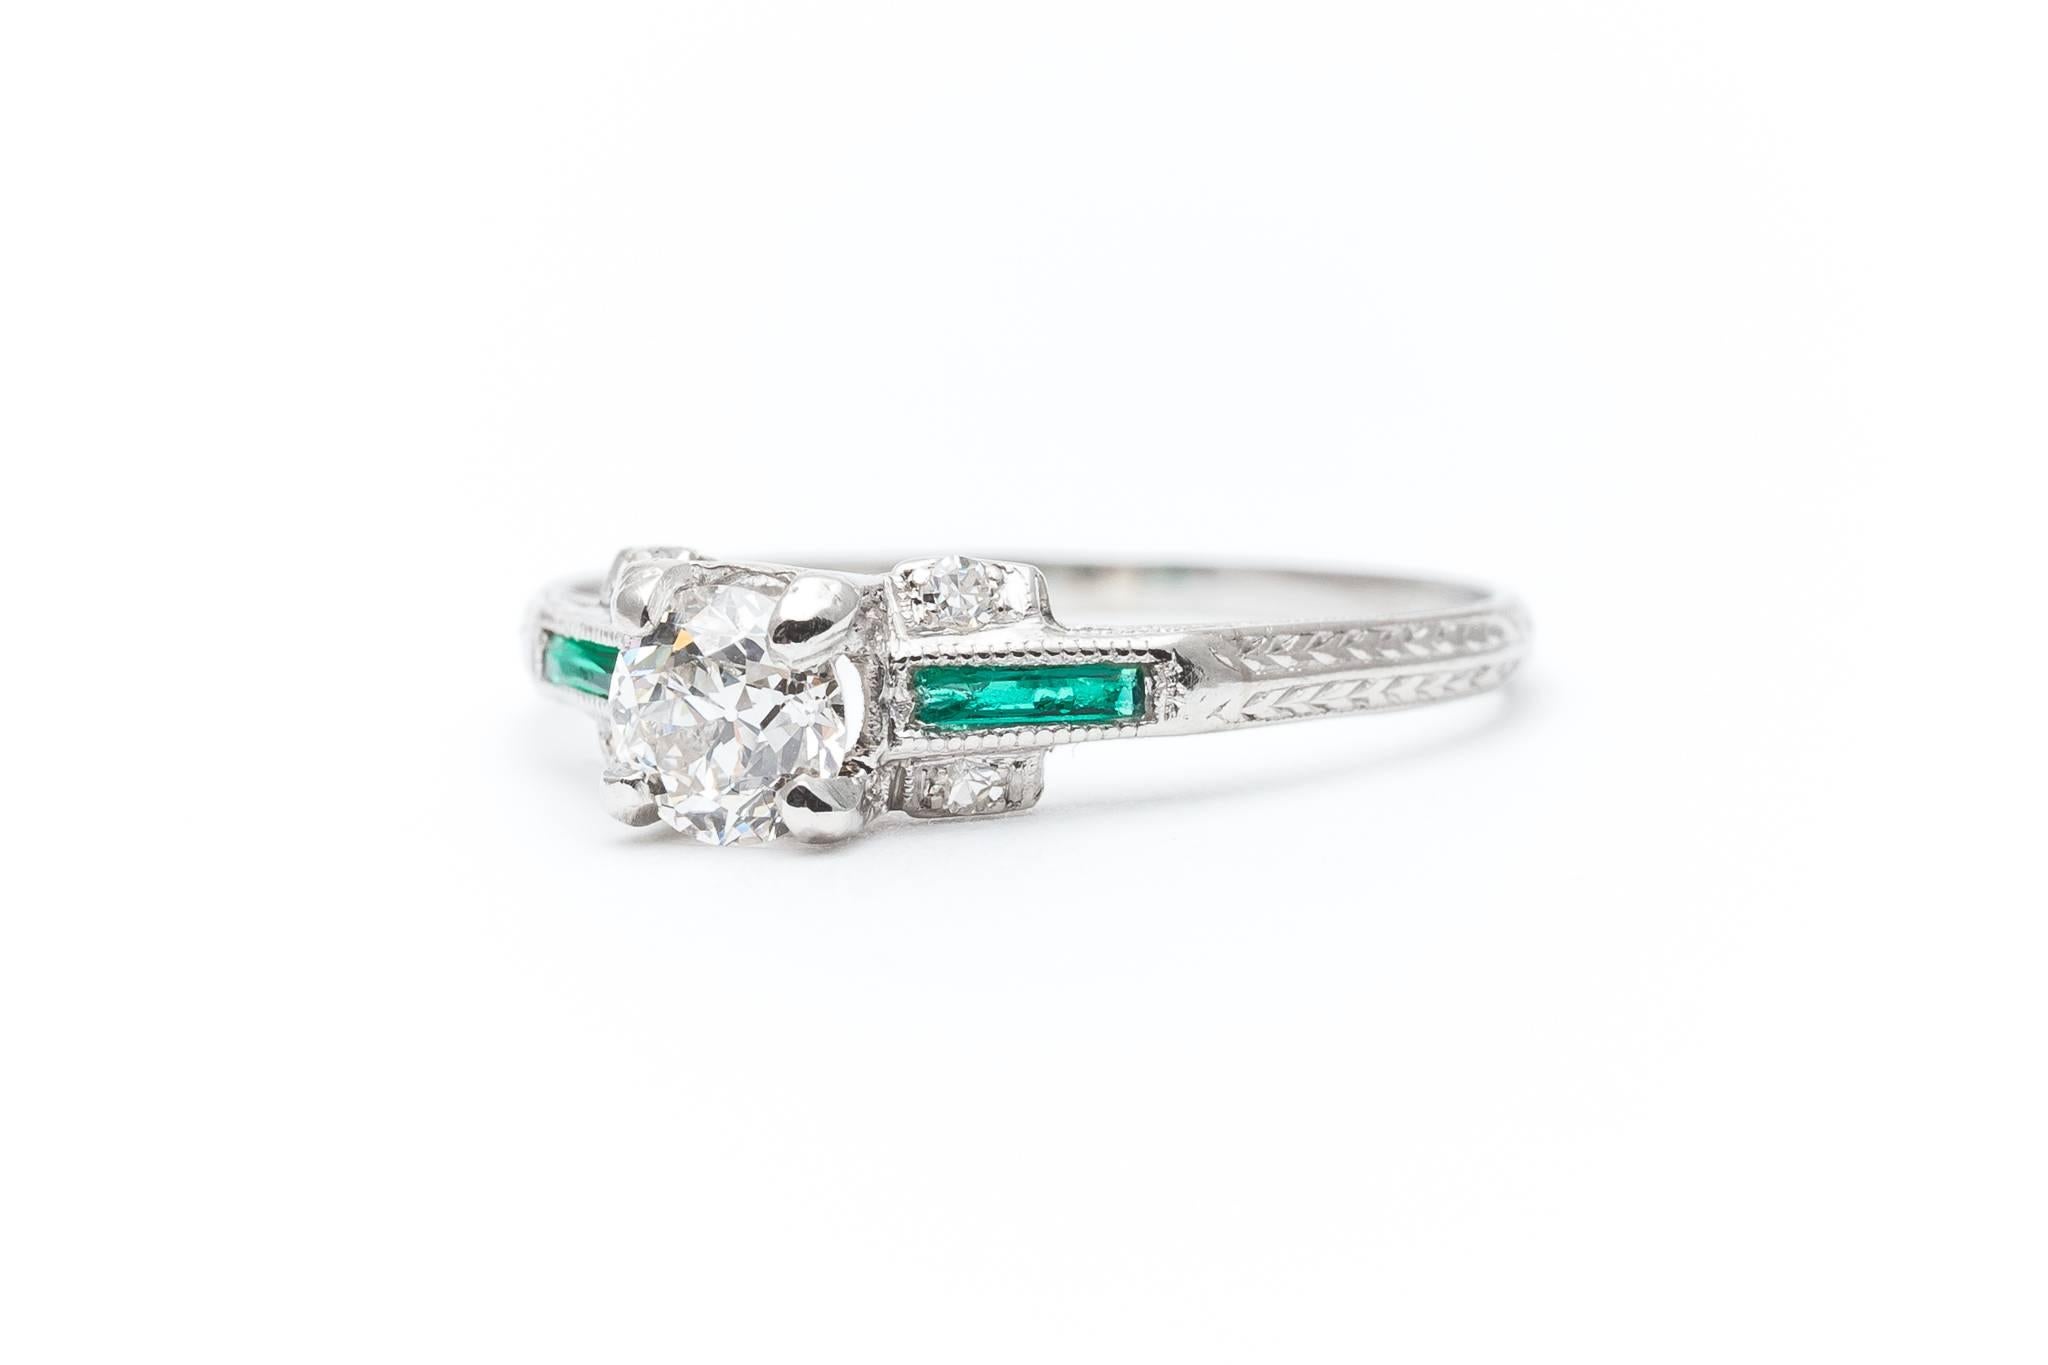 Art Deco Period 0.62 Carat Diamond, Emerald Engagement Ring in Platinum In Excellent Condition For Sale In Boston, MA